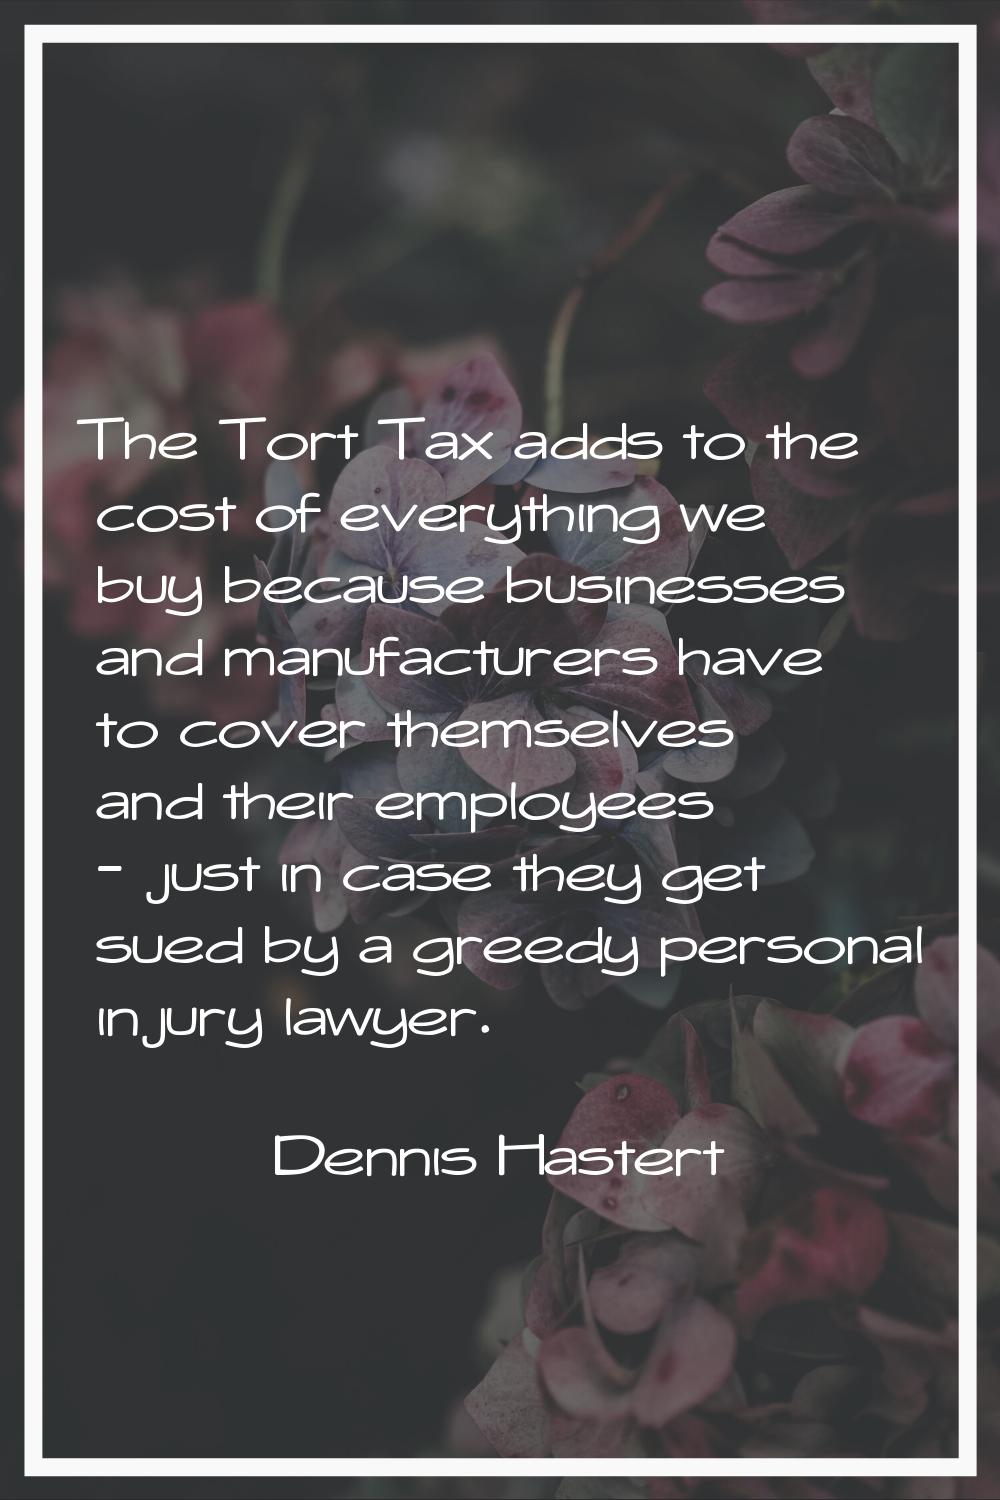 The Tort Tax adds to the cost of everything we buy because businesses and manufacturers have to cov